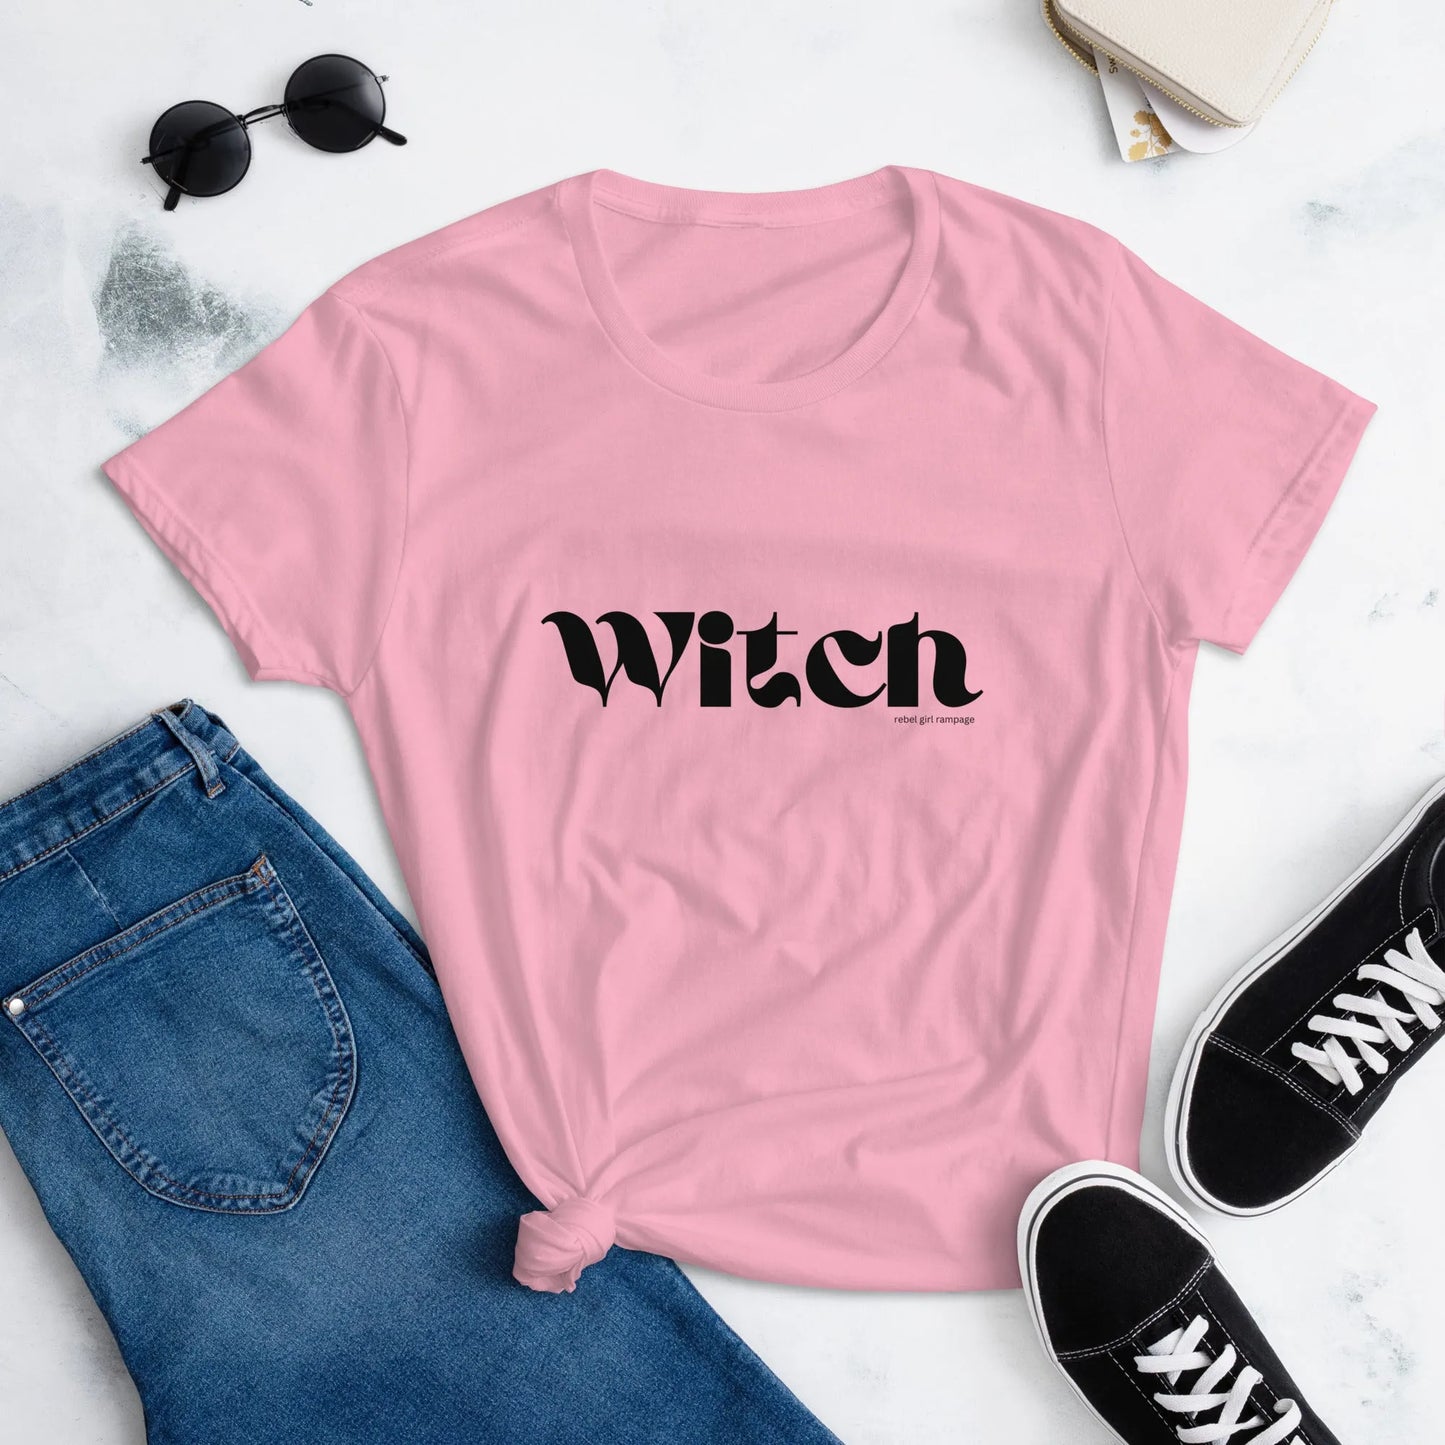 Witch Women’s T- Shirt Girl Power Magic coven spell work Cotton witchy woman by Rebel Girl Rampage 